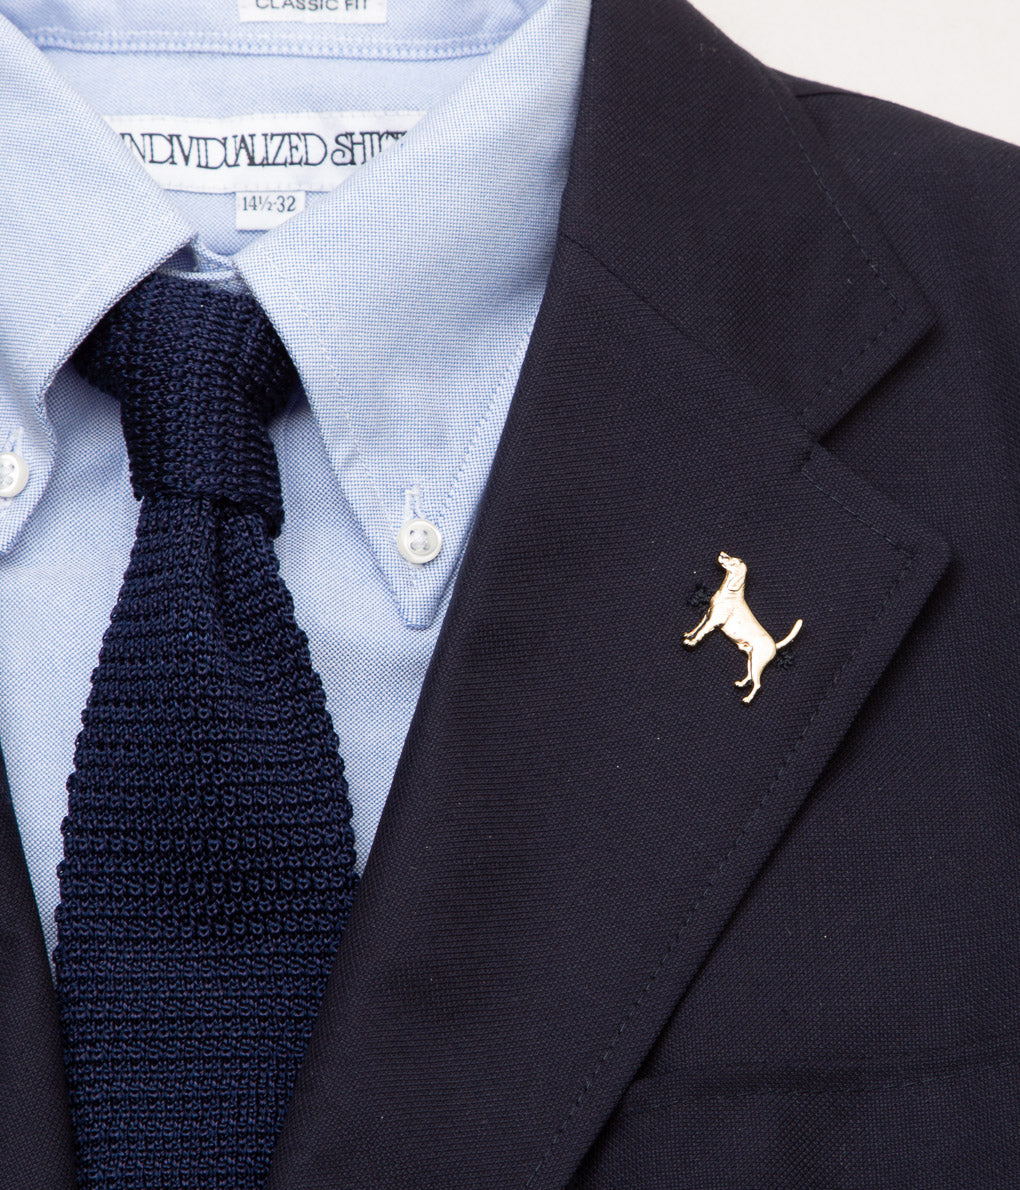 FINE AND DANDY "LAPEL PIN (POINTER)"(GOLD)